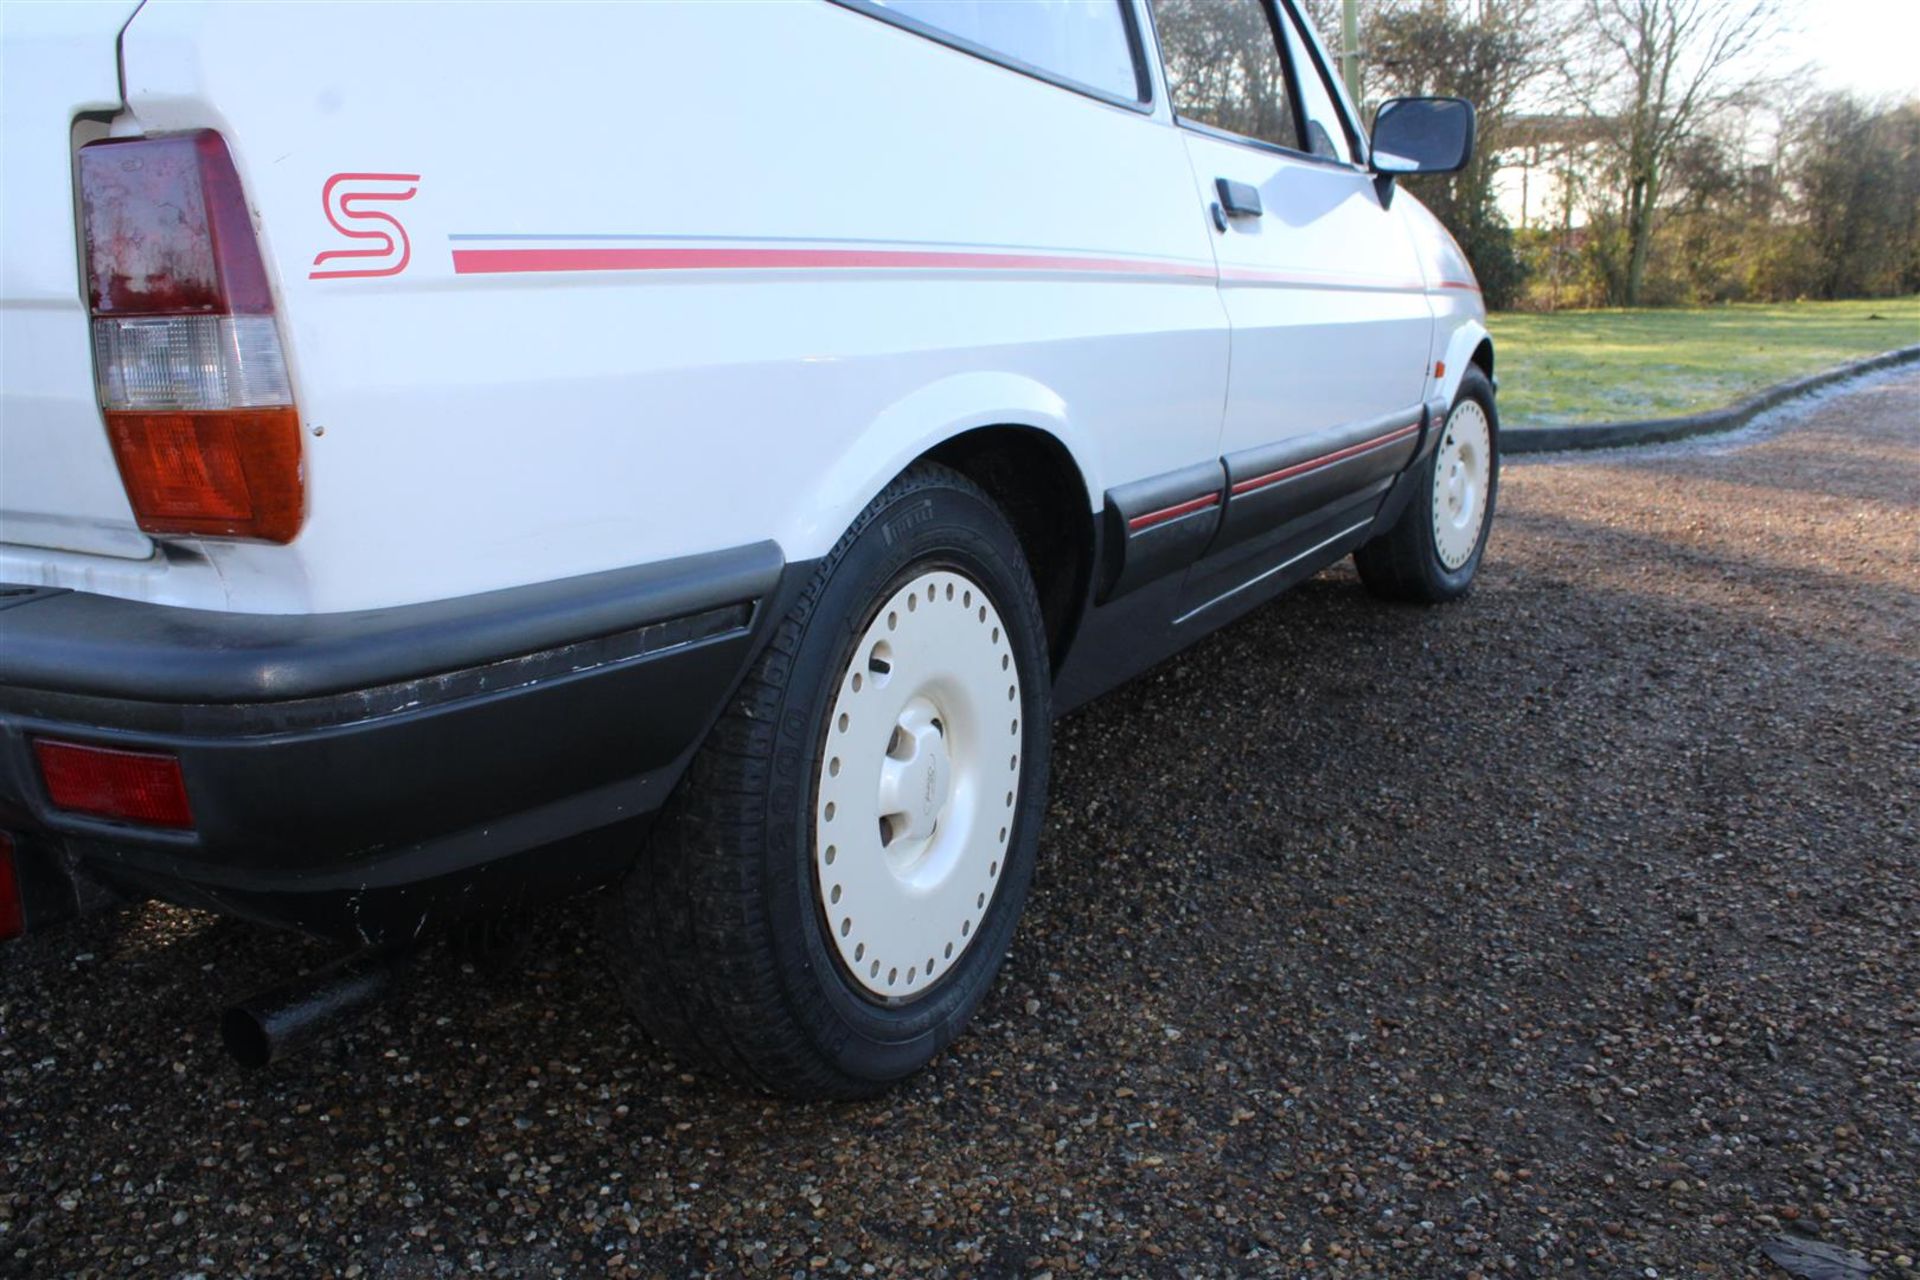 1987 Ford Fiesta 1.4 S Mk2 - Image 23 of 29